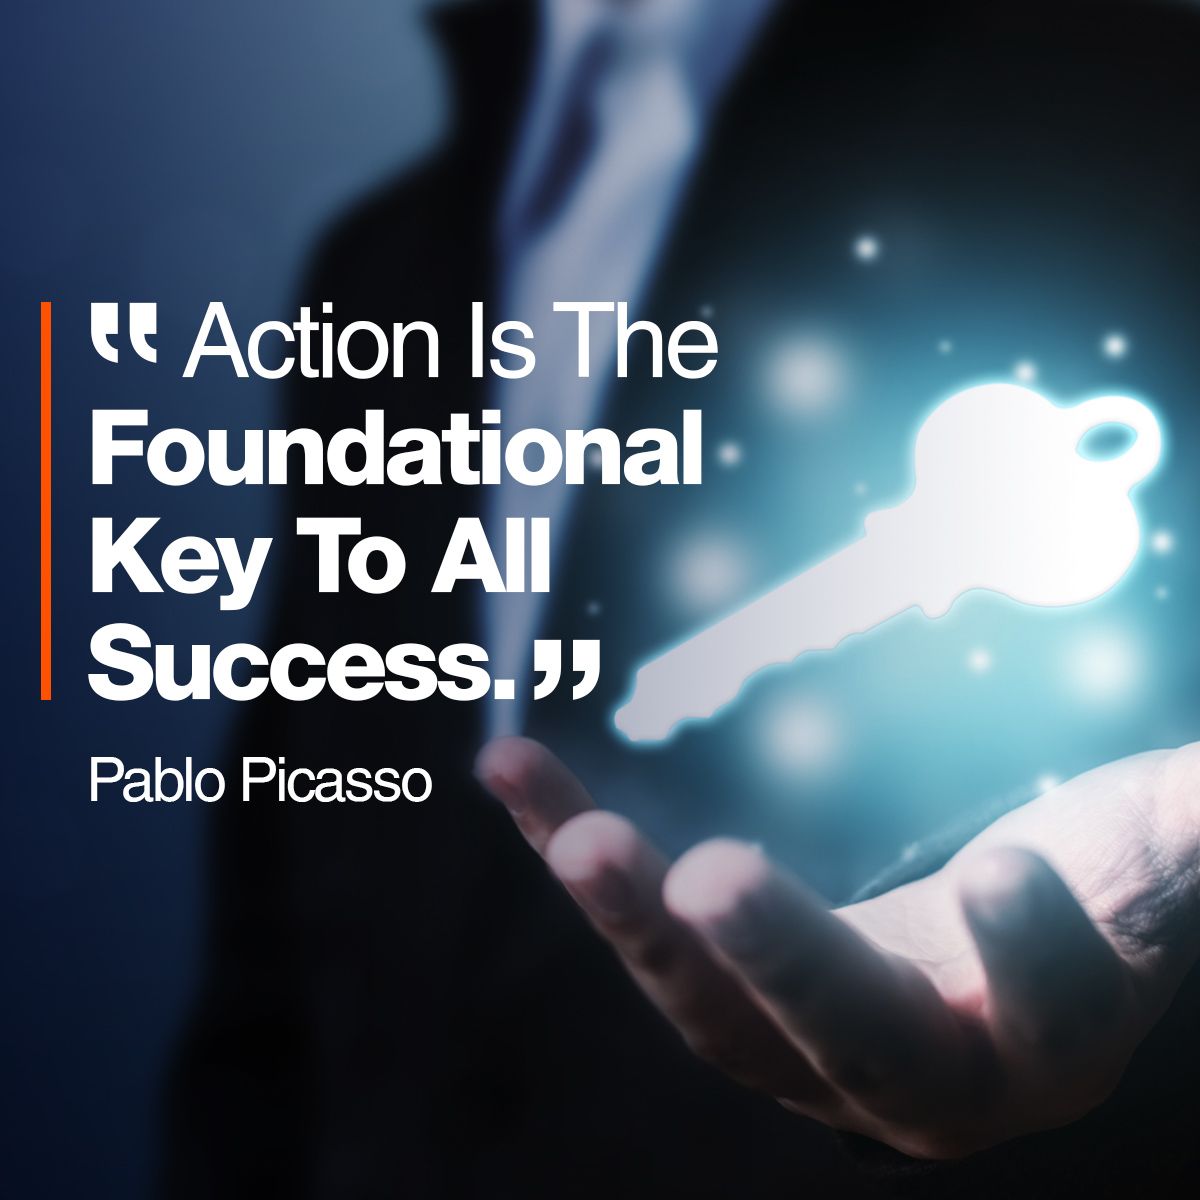 Action Is The Foundational Key To All Success - Pablo Picasso